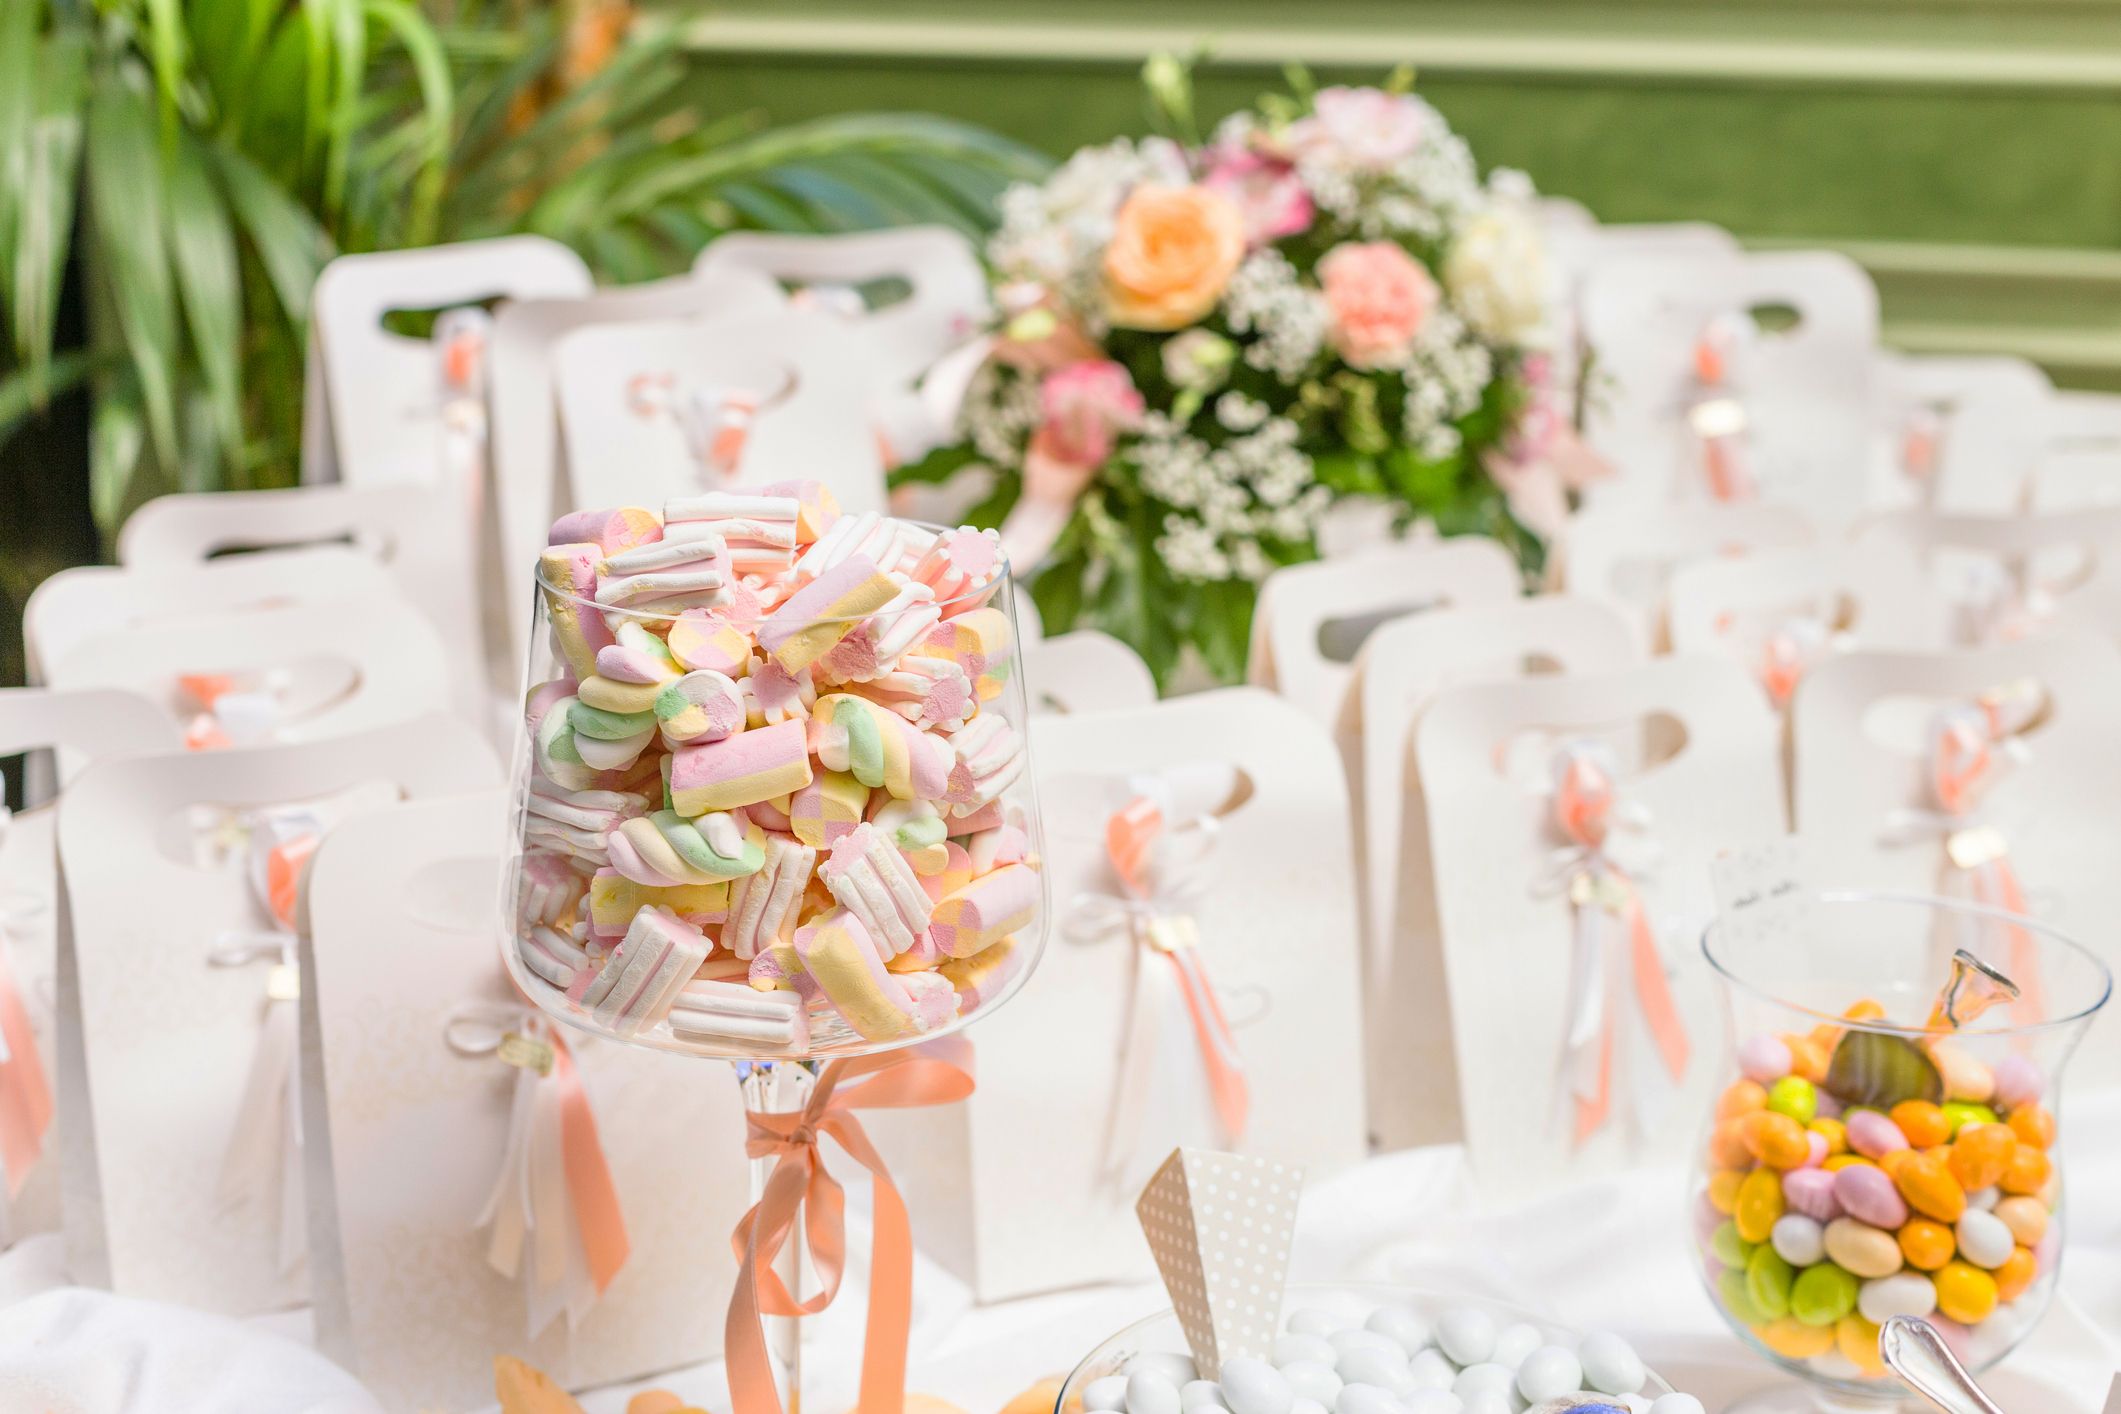 Favor Bridal Shower Favors Spring Favors Summer Party Favors Eco-Friendly Wedding Wedding Favors Wedding Favors Custom Seed Packets